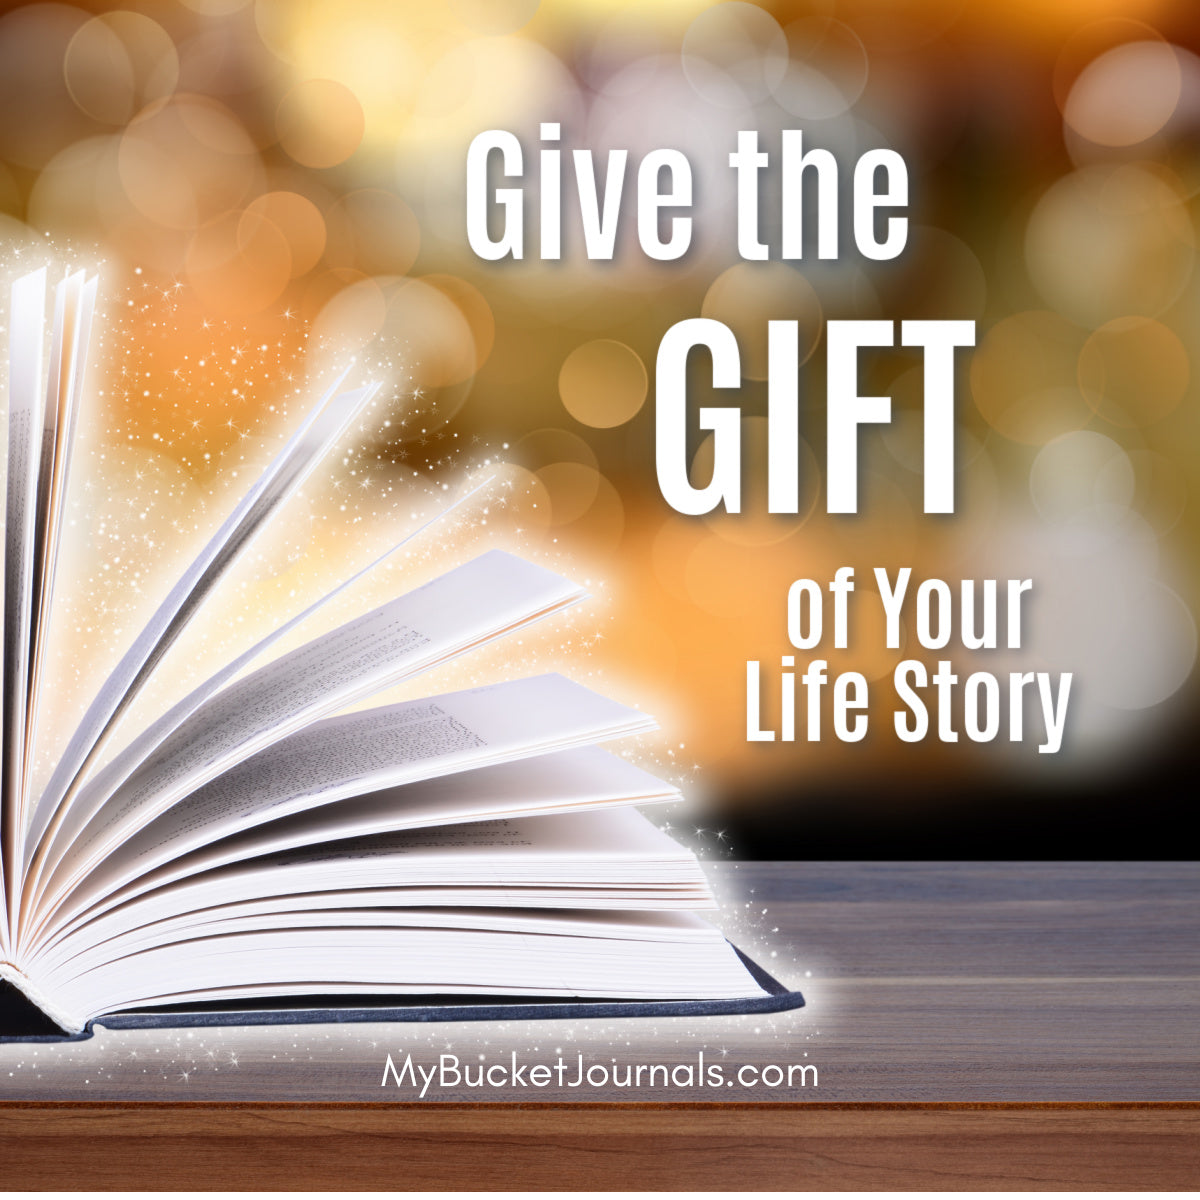 Give the Gift of Your Life Story